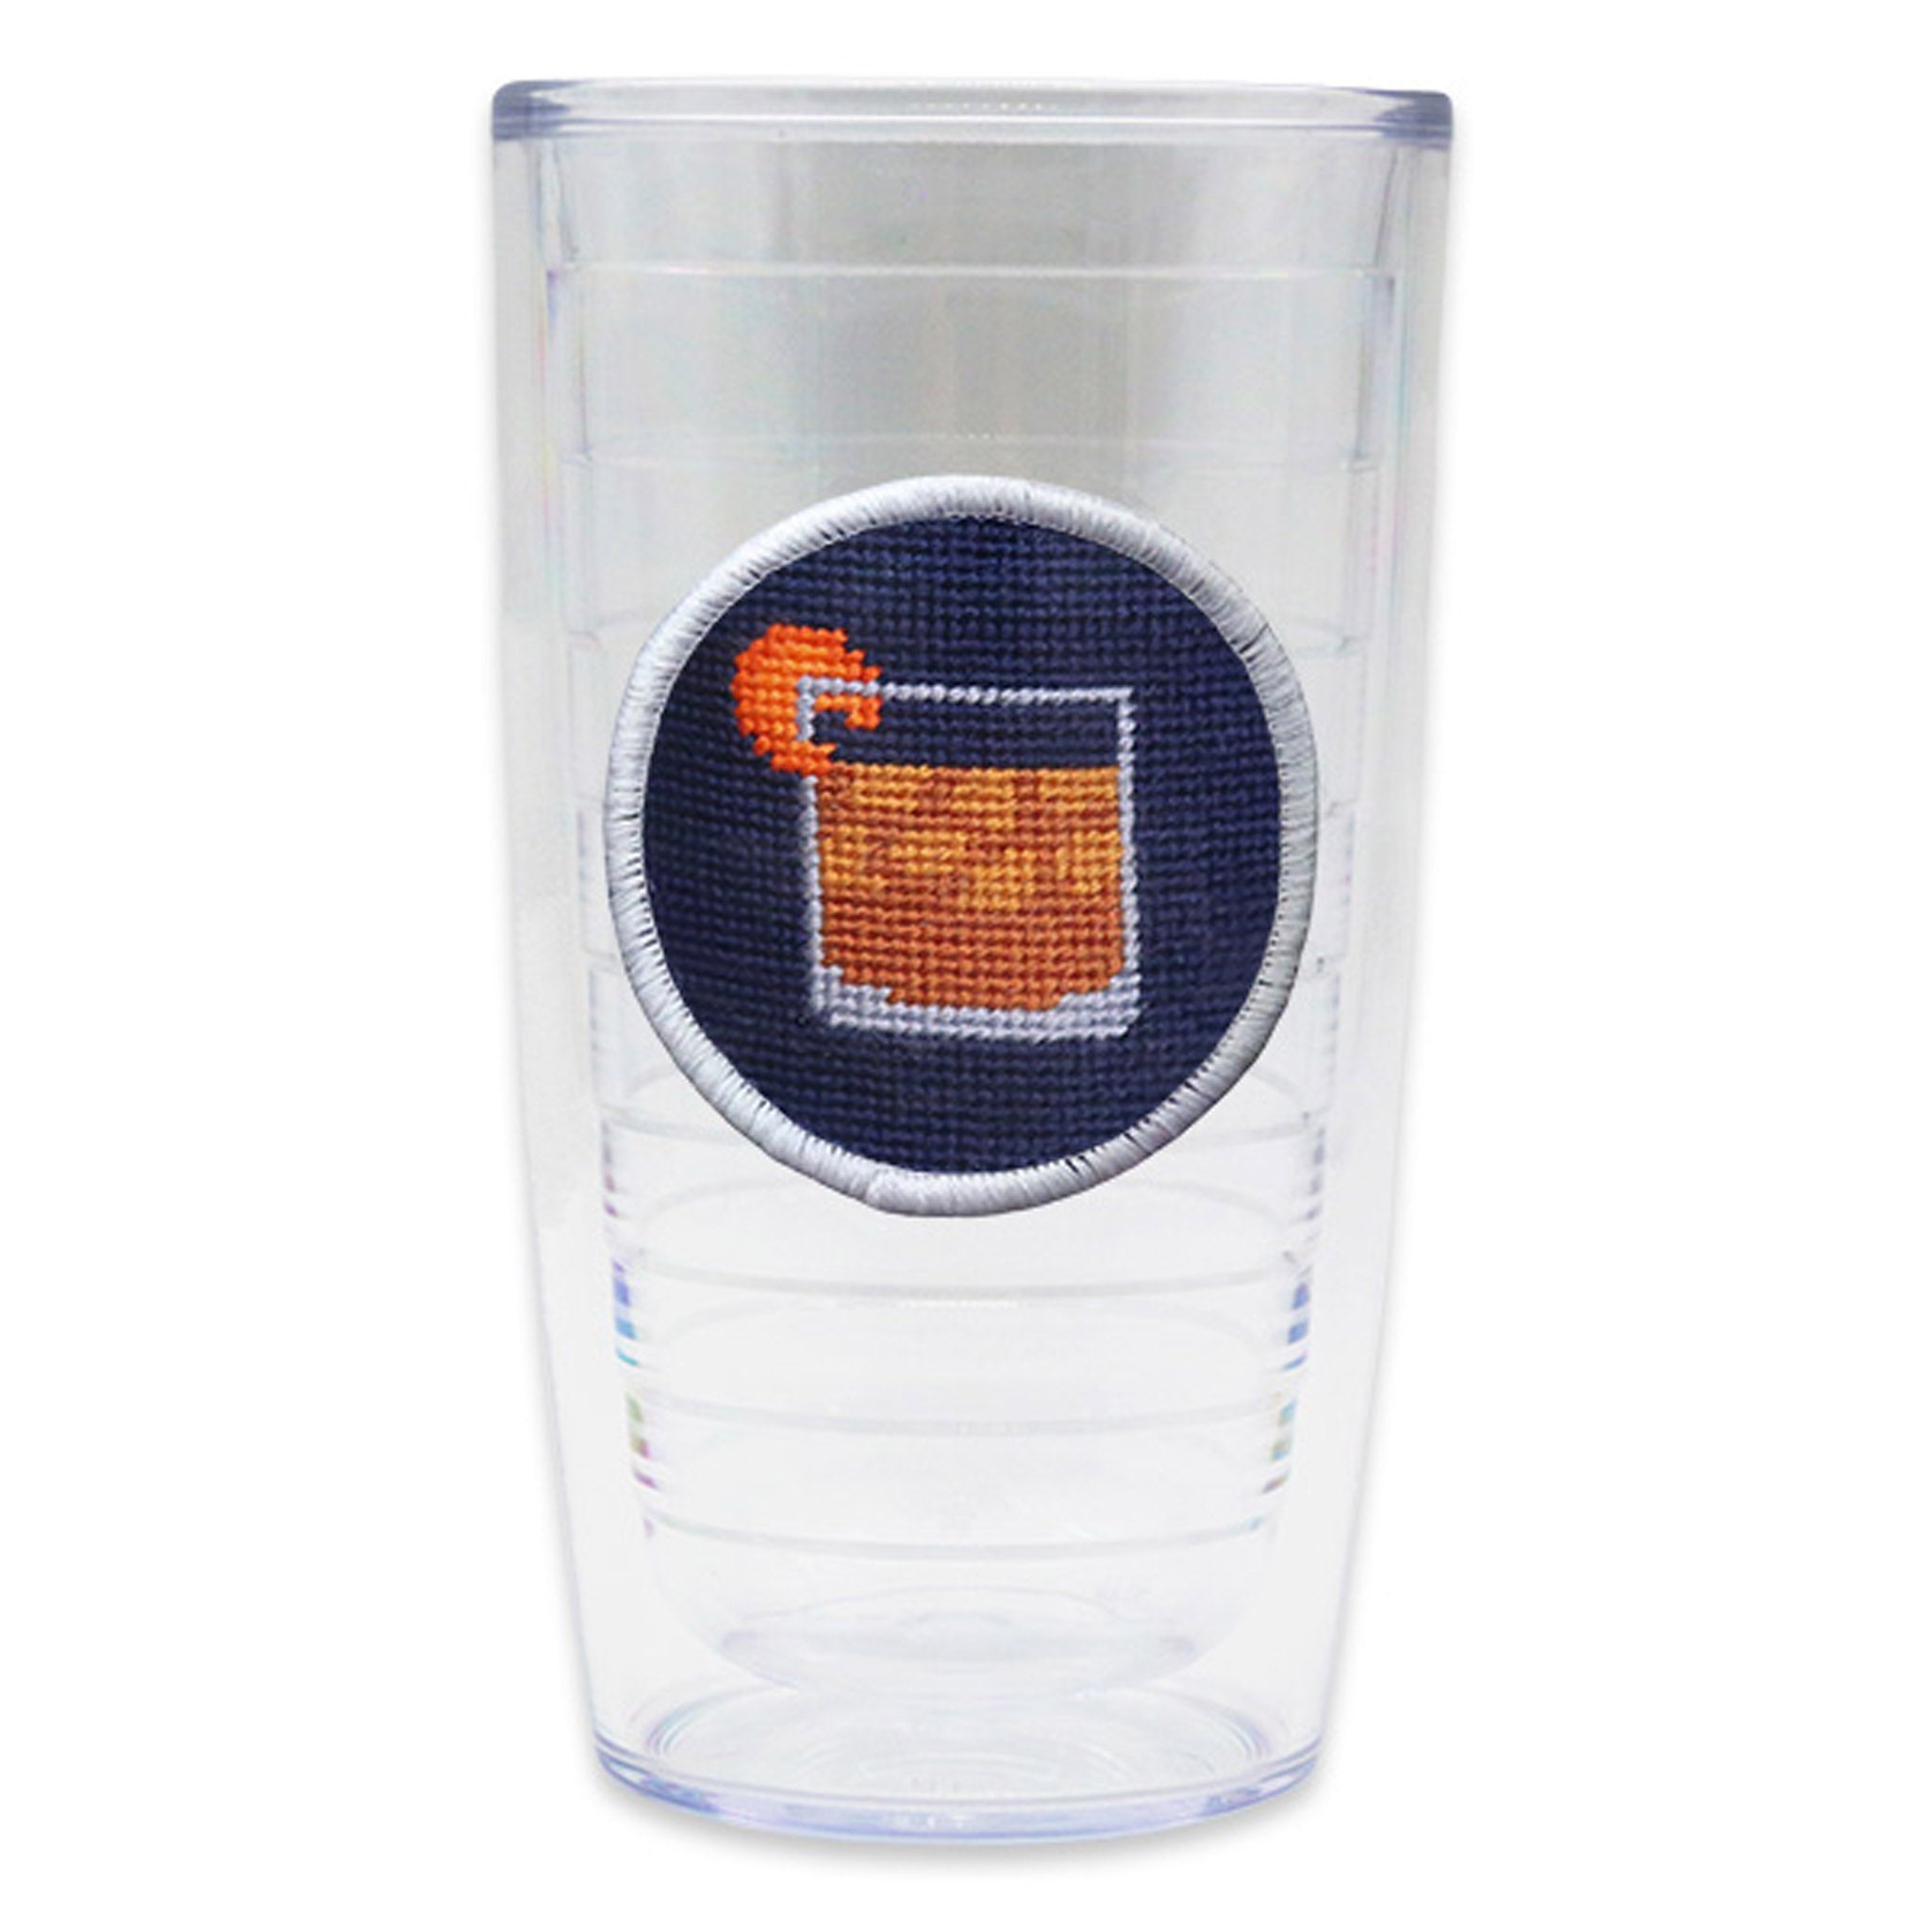 Old Fashioned Tervis Tumbler (Dark Navy)